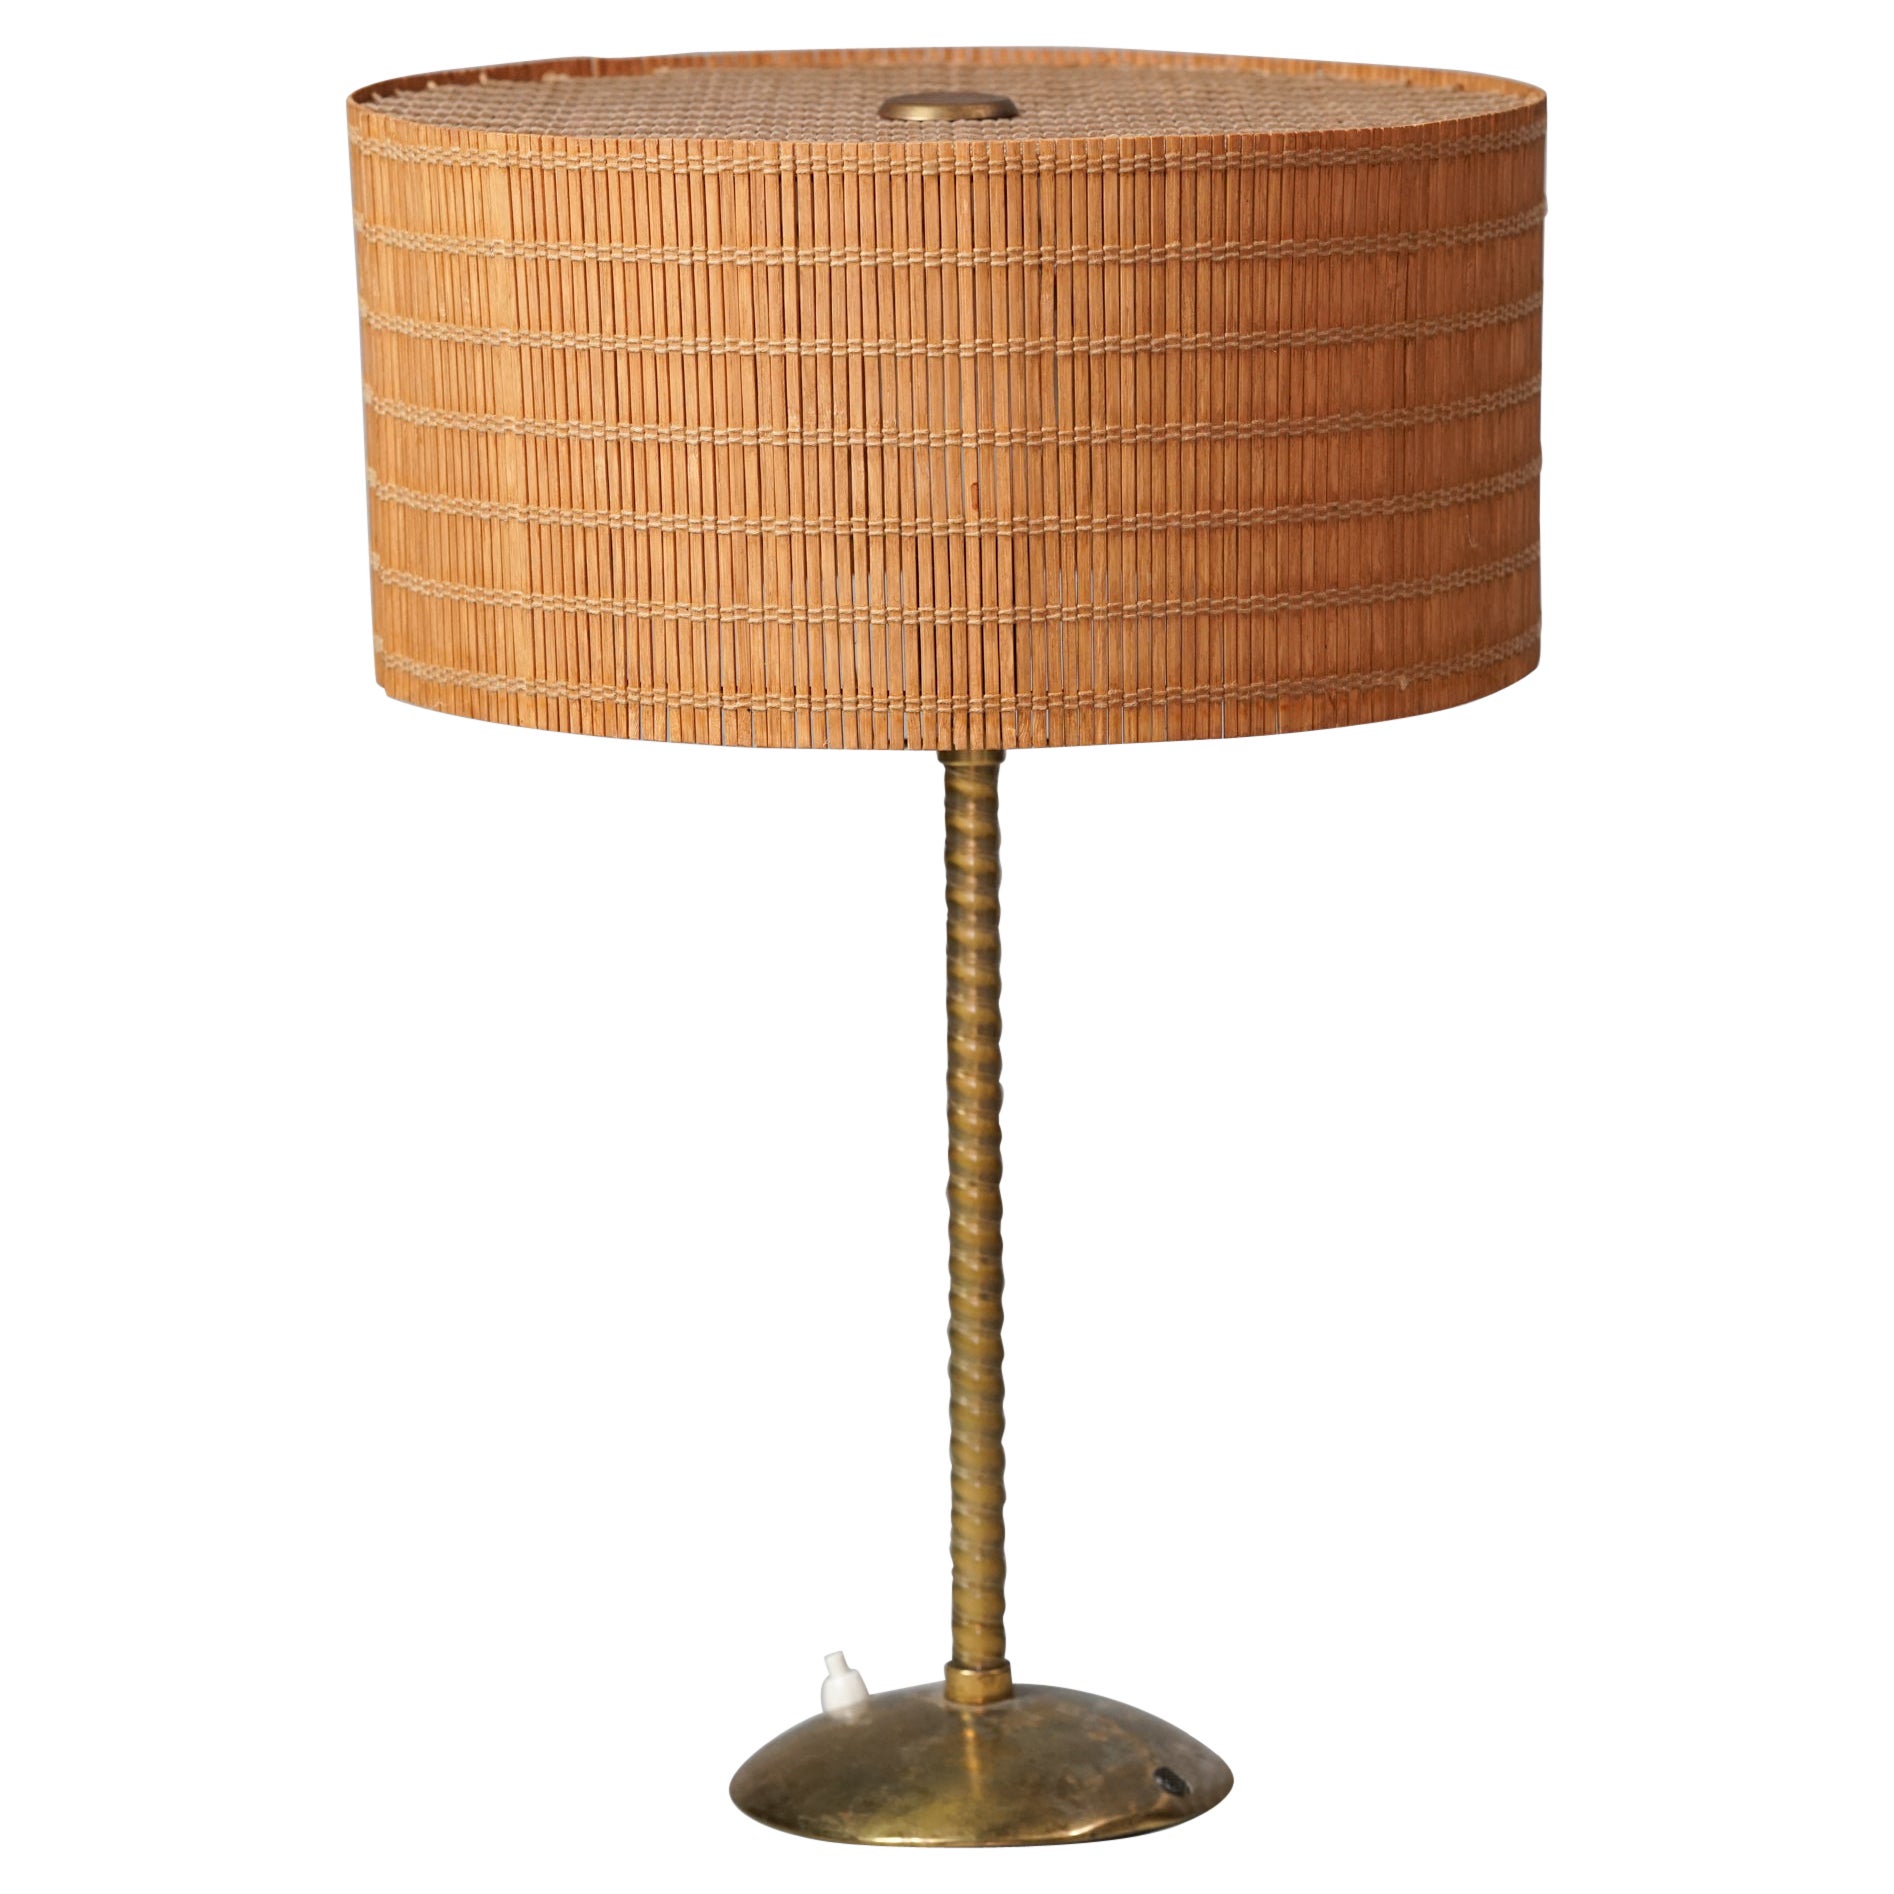 Rare Lisa Johansson-Pape Table Lamp, Orno Oy, 1940/1950s For Sale